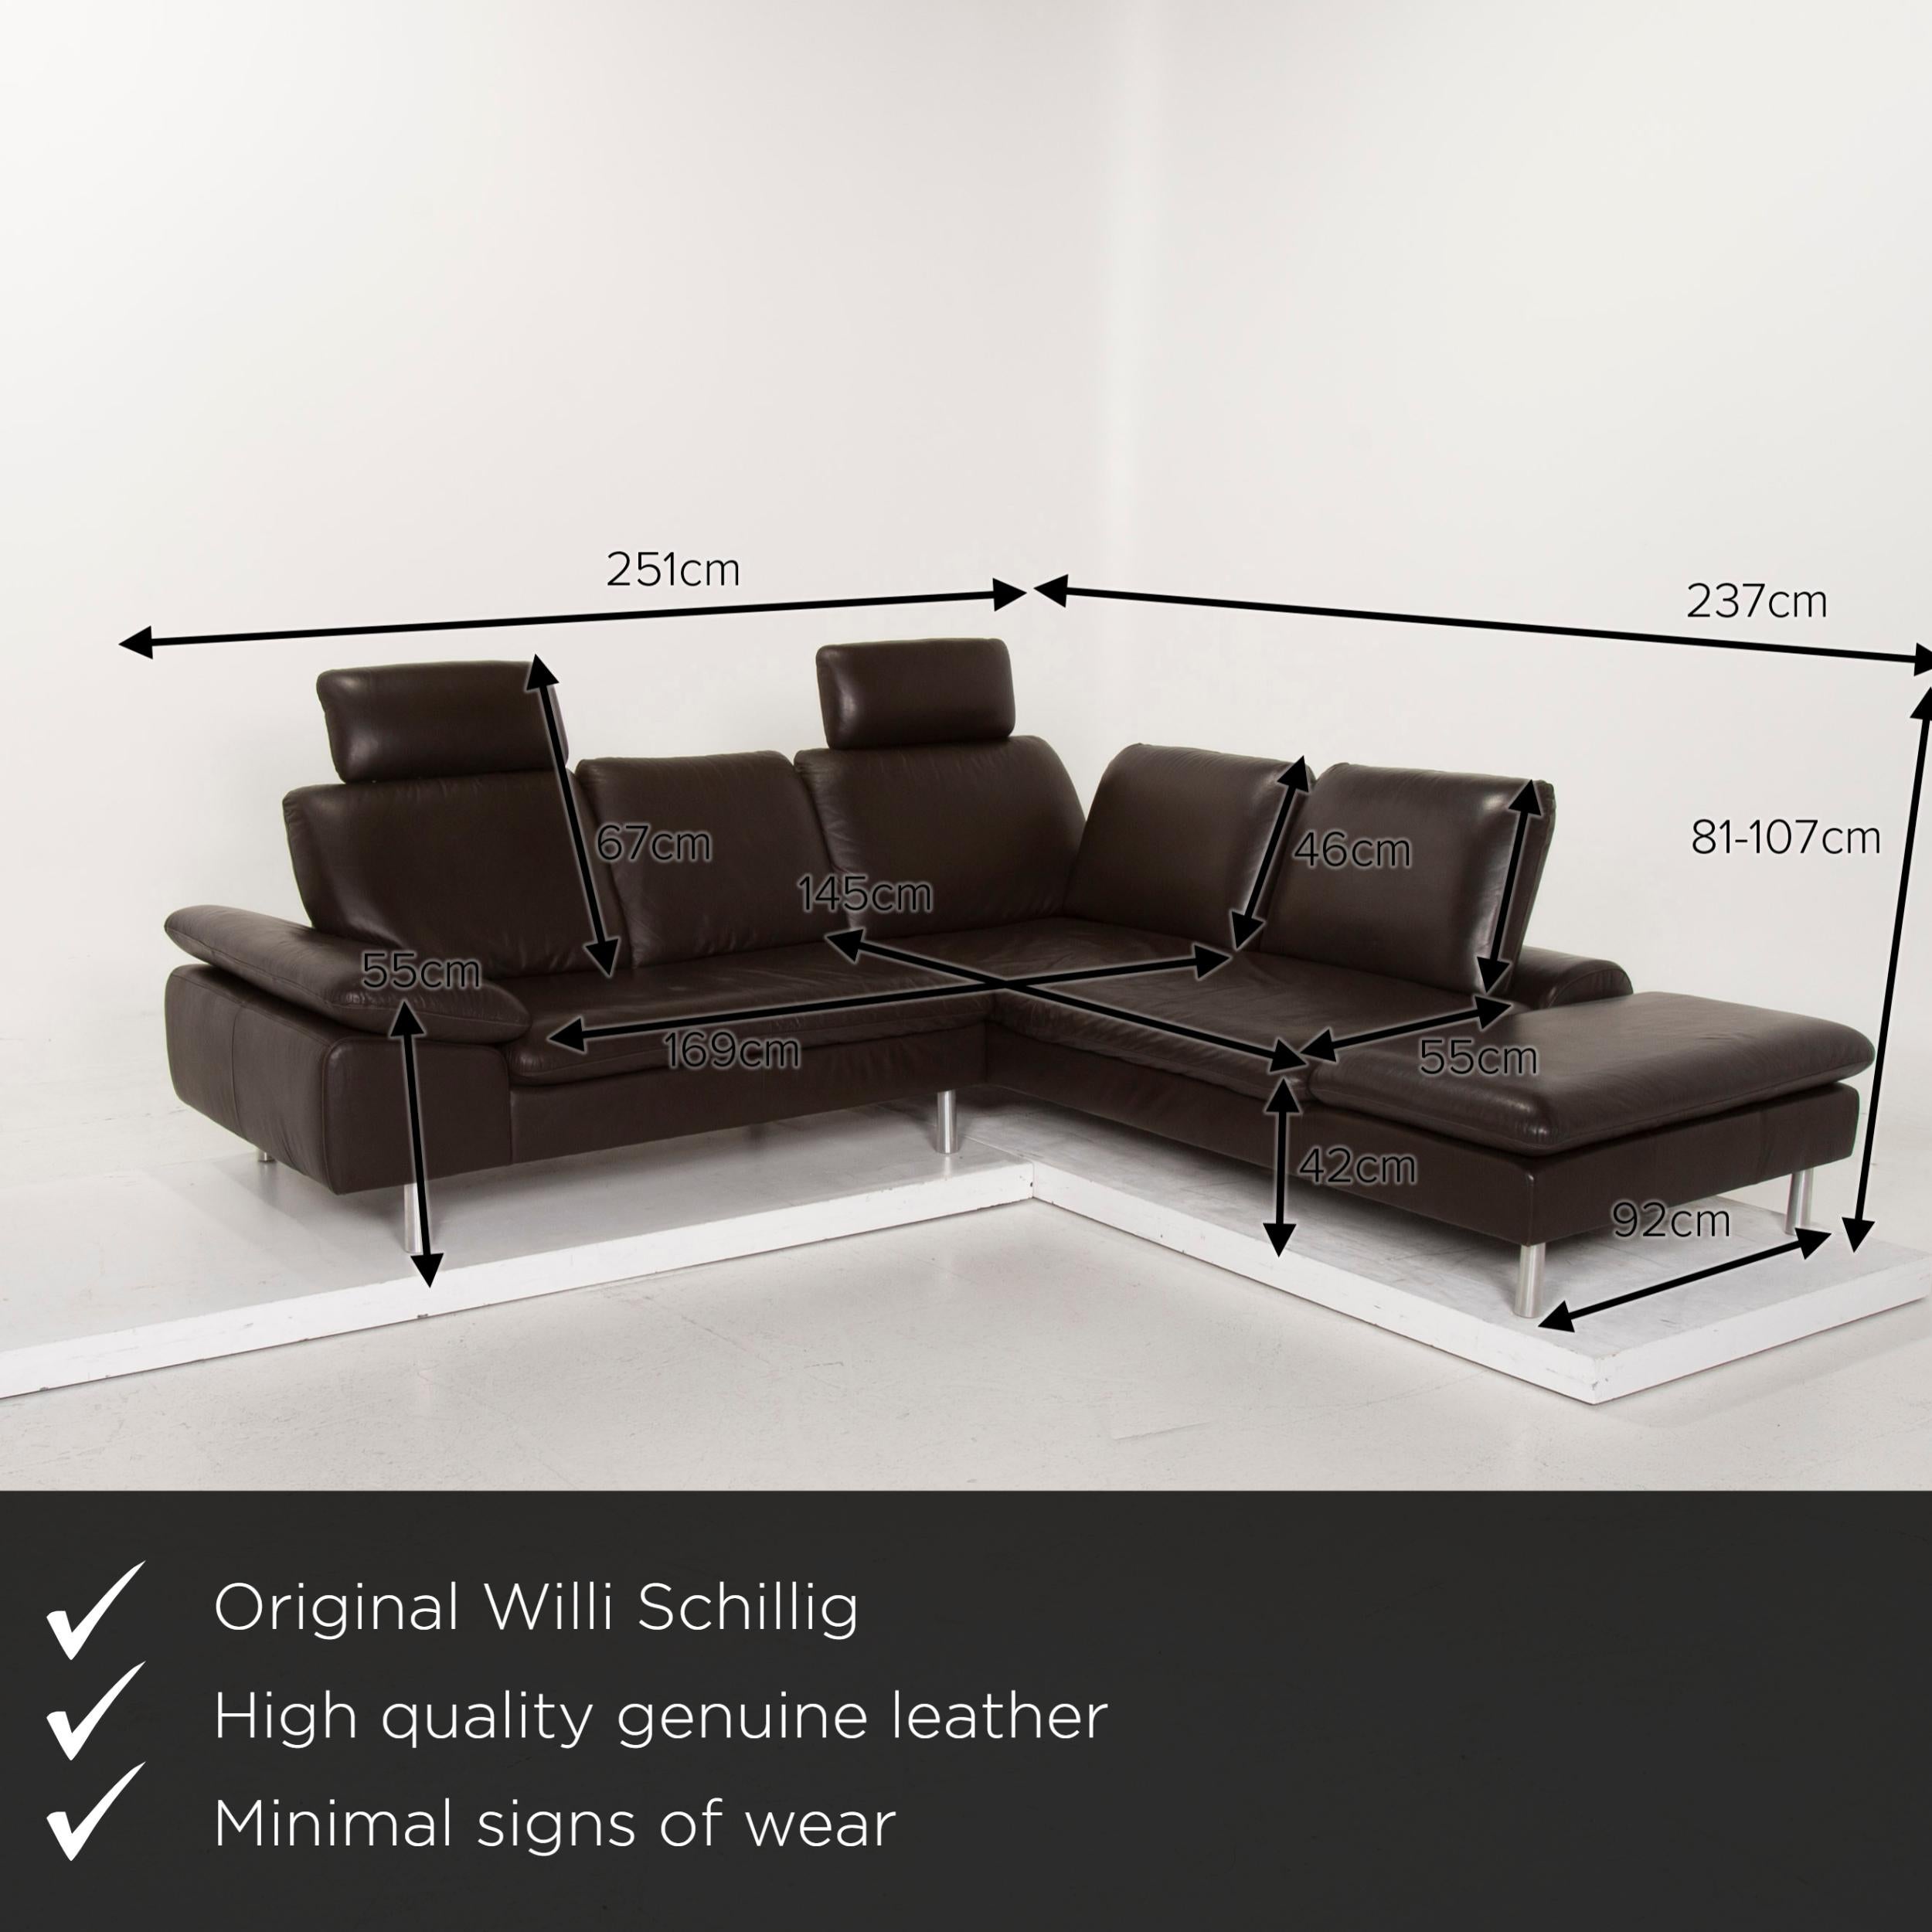 We present to you a Willi Schillig Loop leather sofa dark brown corner sofa.


 Product measurements in centimeters:
 

Depth 92
Width 251
Height 81
Seat height 42
Rest height 42
Seat depth 55
Seat width 169
Back height 46.

 